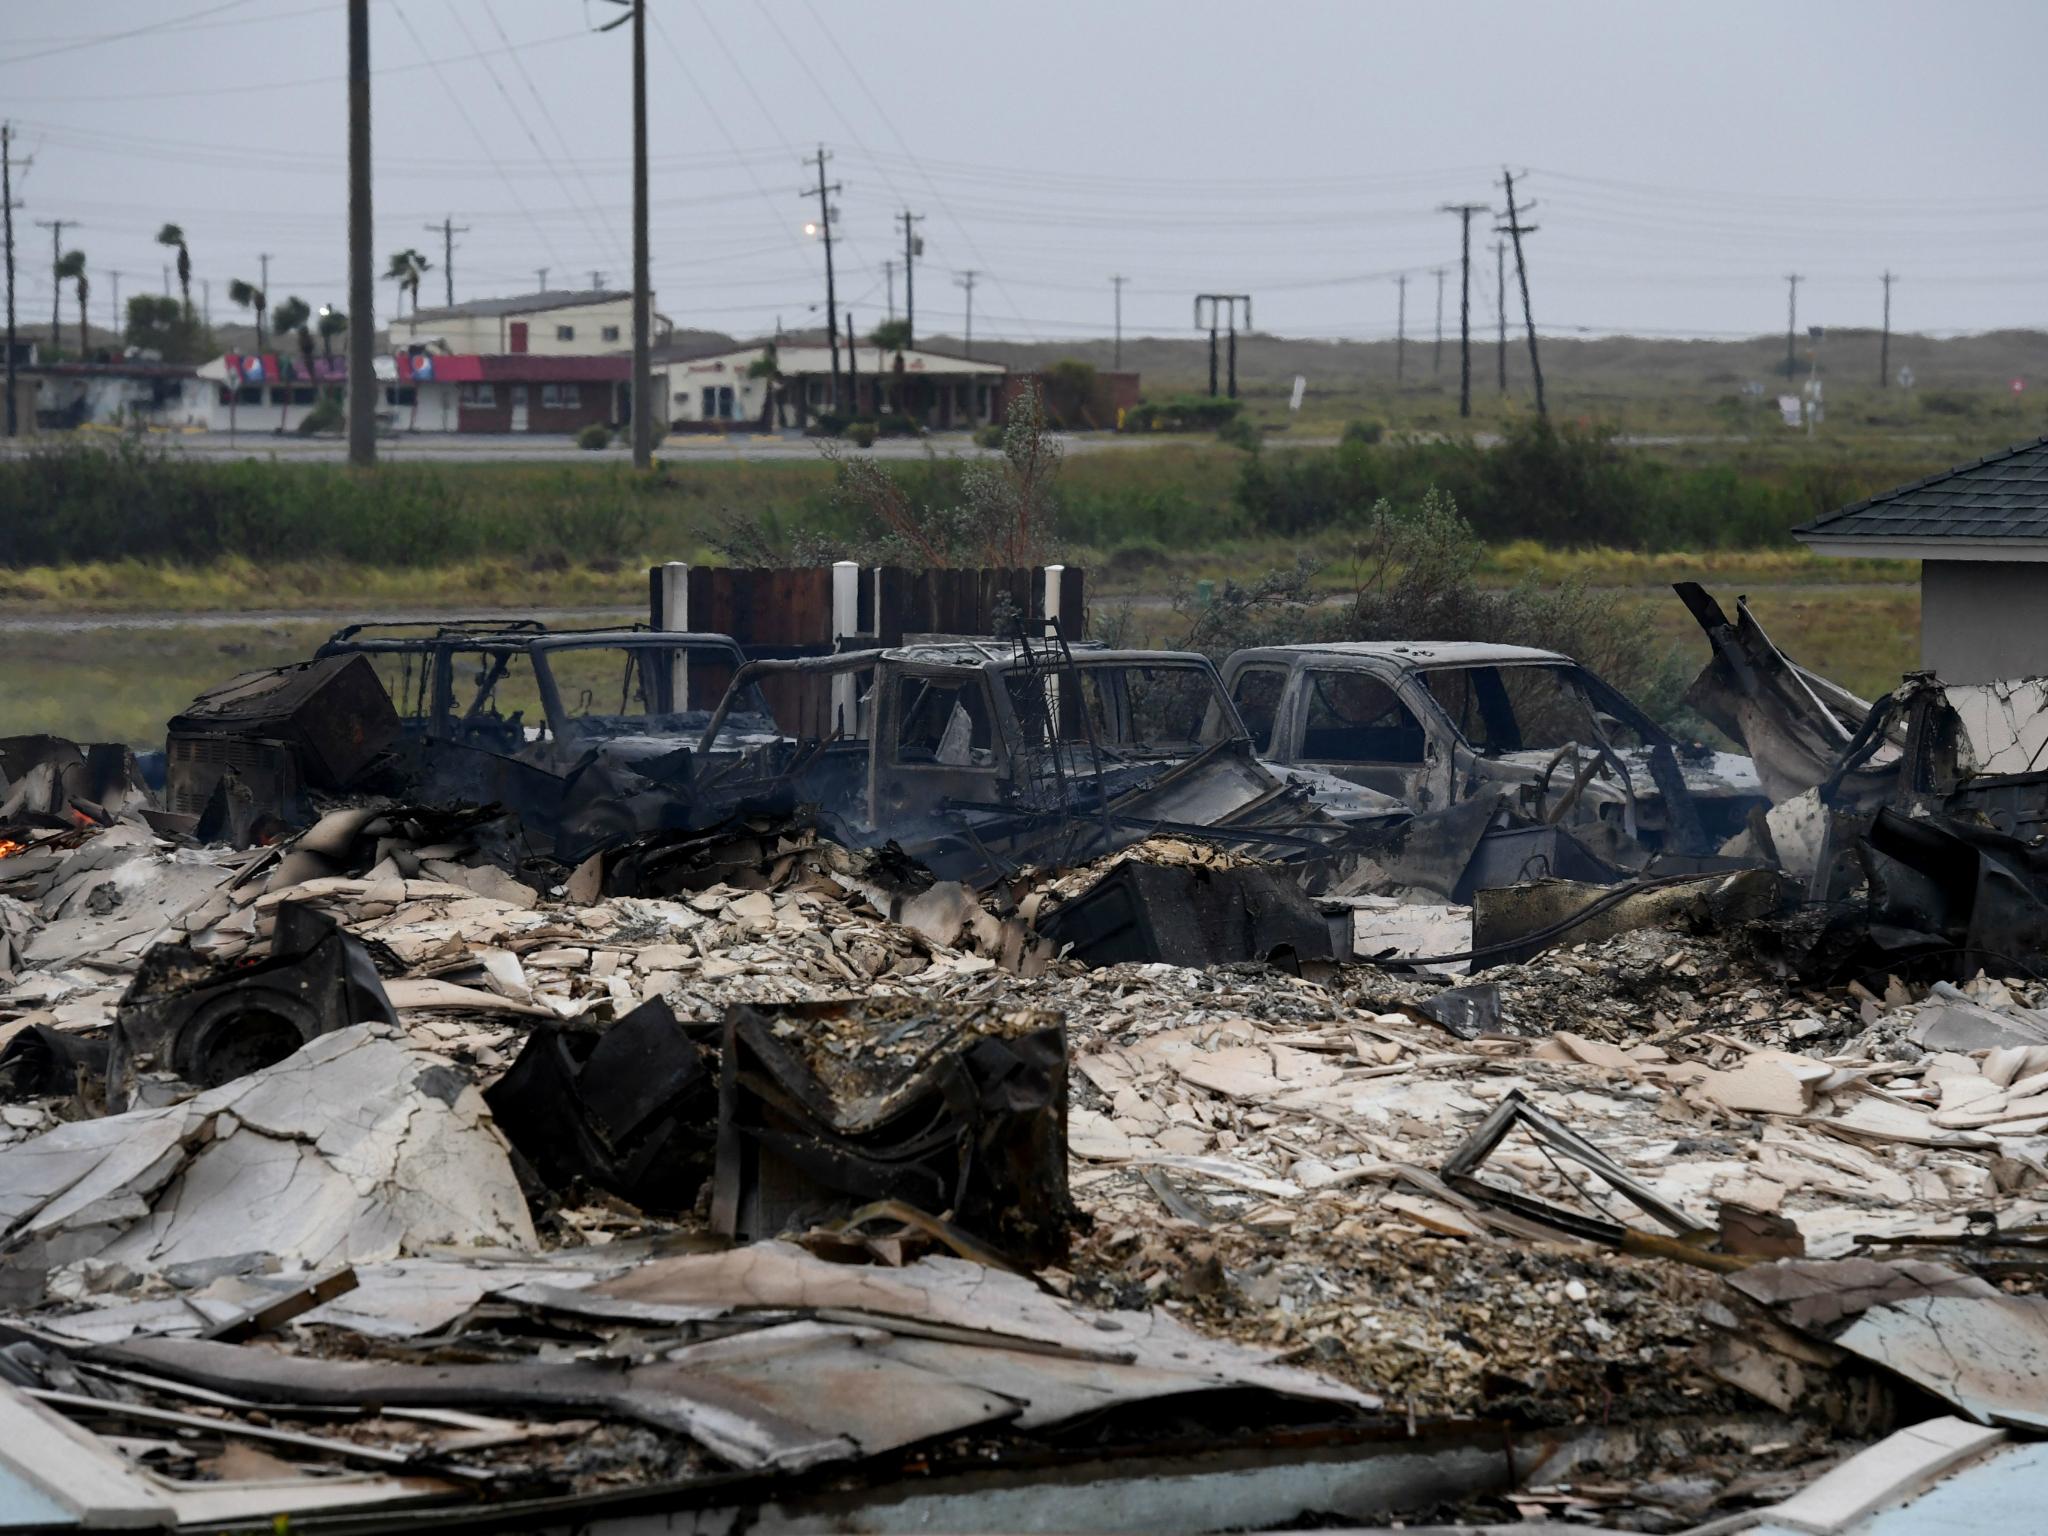 A burnt out house and cars that caught fire are seen after Hurricane Harvey hit Corpus Christi, Texas on 26 August 2017